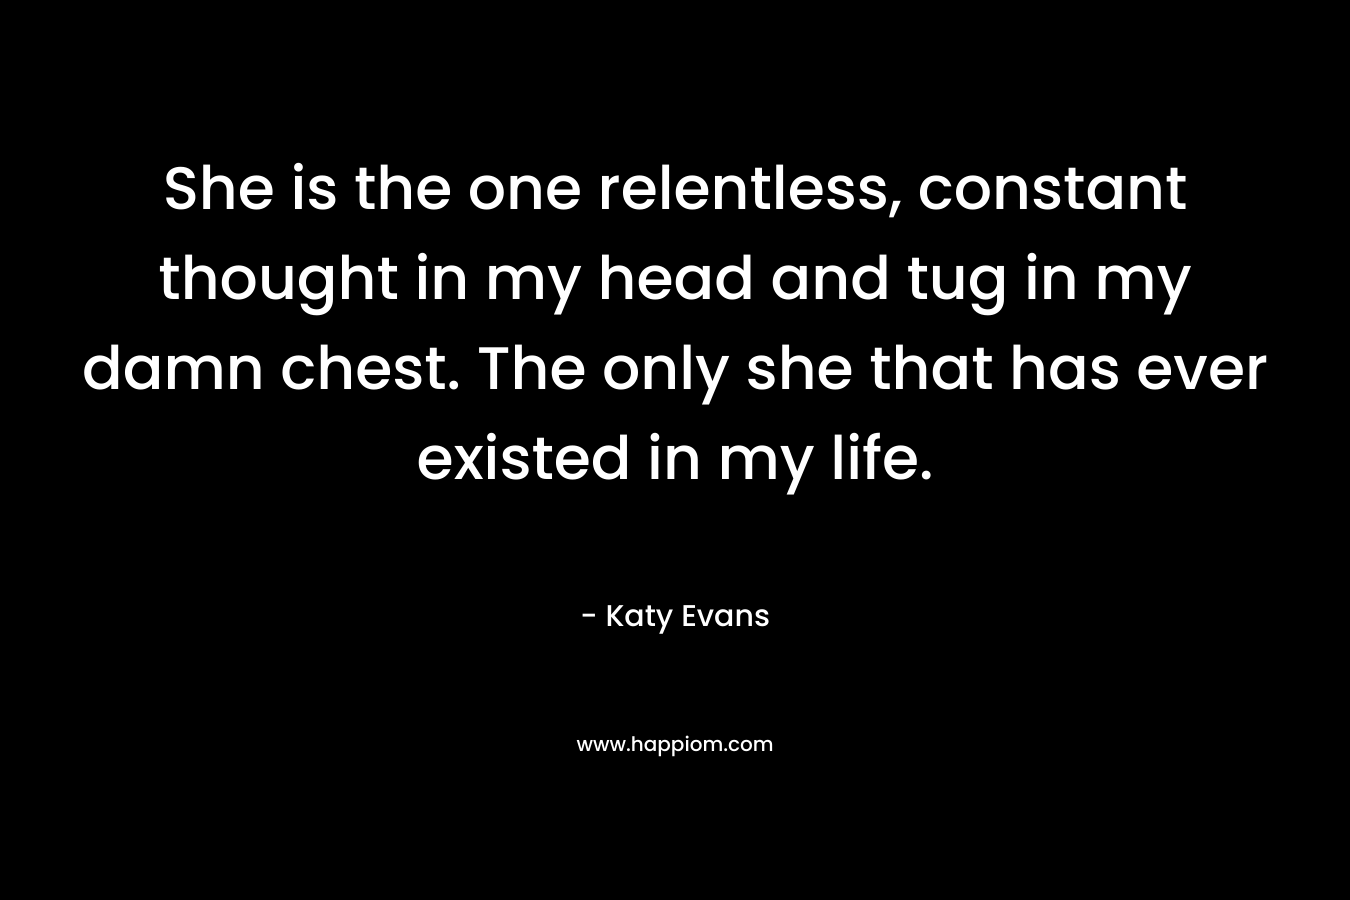 She is the one relentless, constant thought in my head and tug in my damn chest. The only she that has ever existed in my life. – Katy Evans